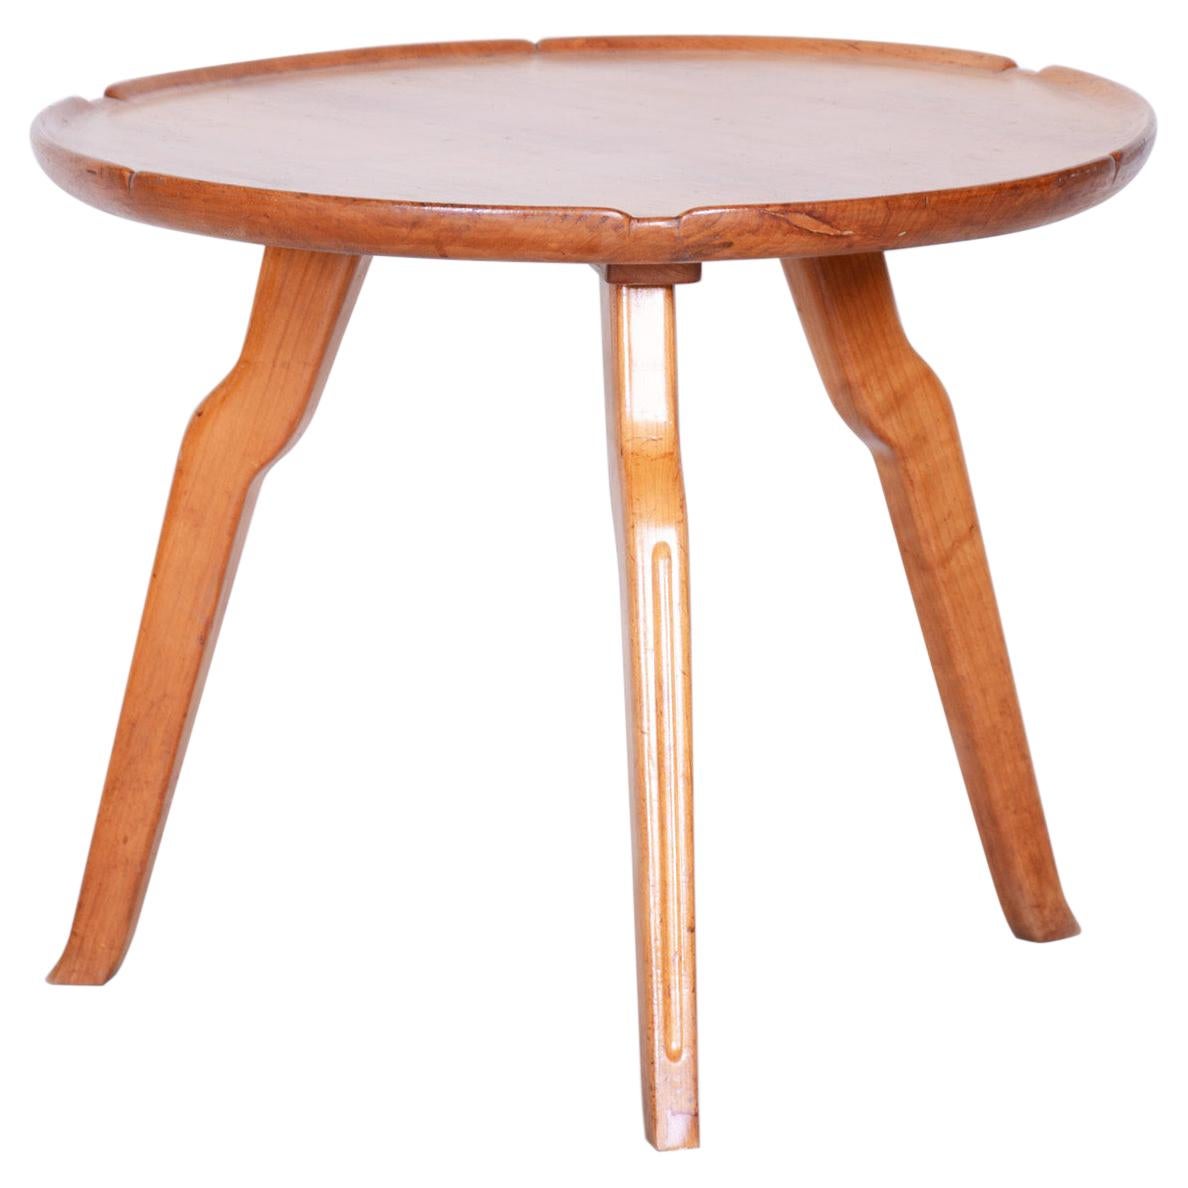 Small Brown Round Table, Czech Midcentury, Made Out of Cherry Tree, 1940s For Sale